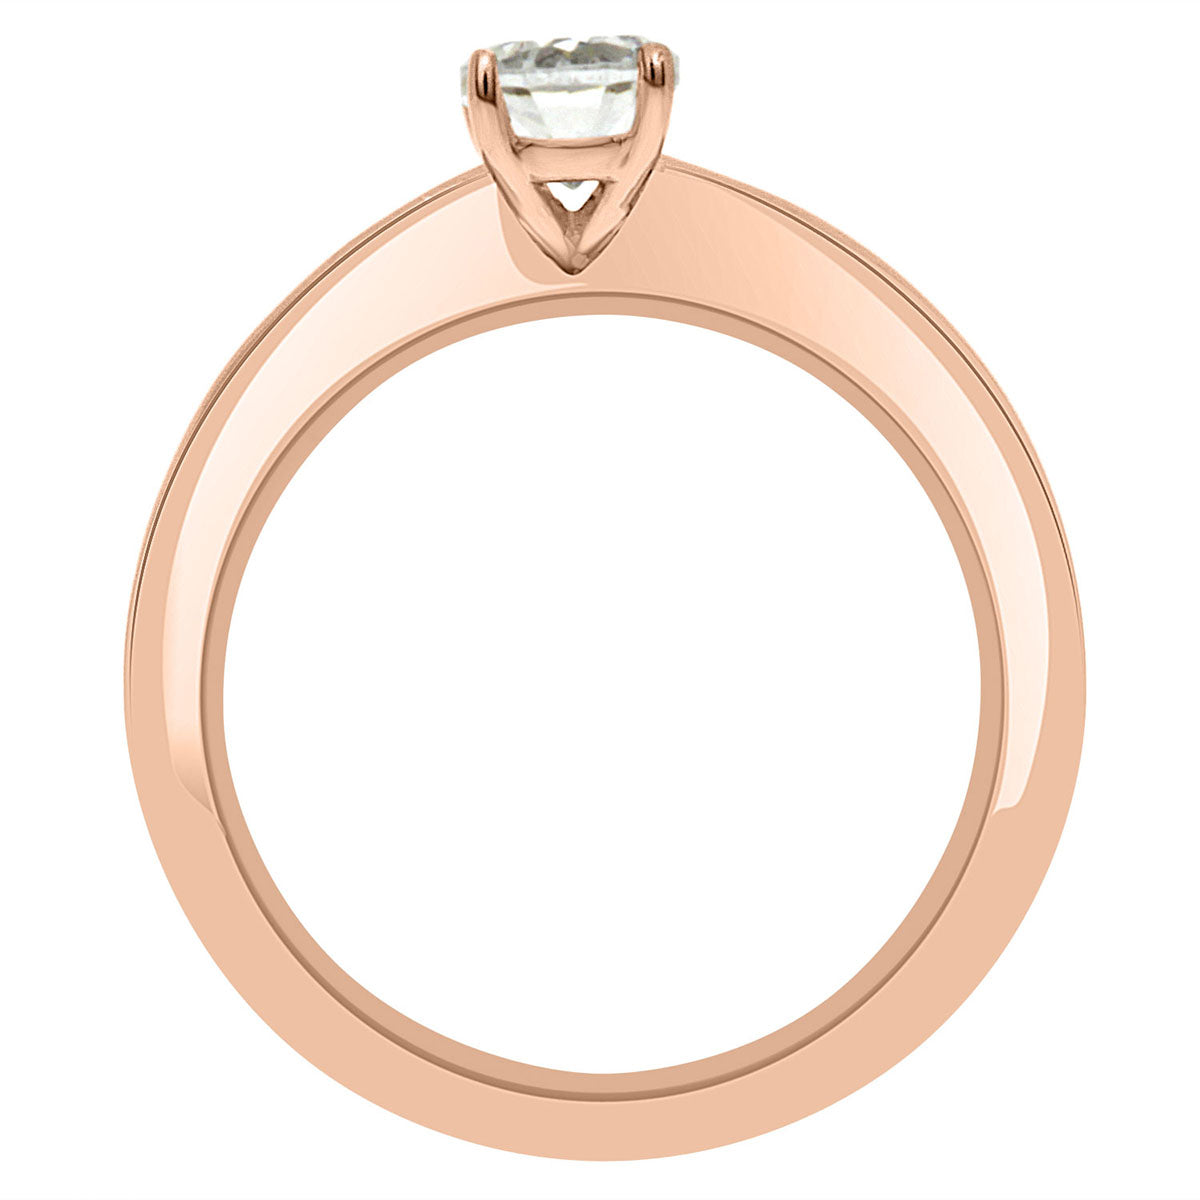 Knife Edge Band Engagement Ring in rose gold metal standing upright